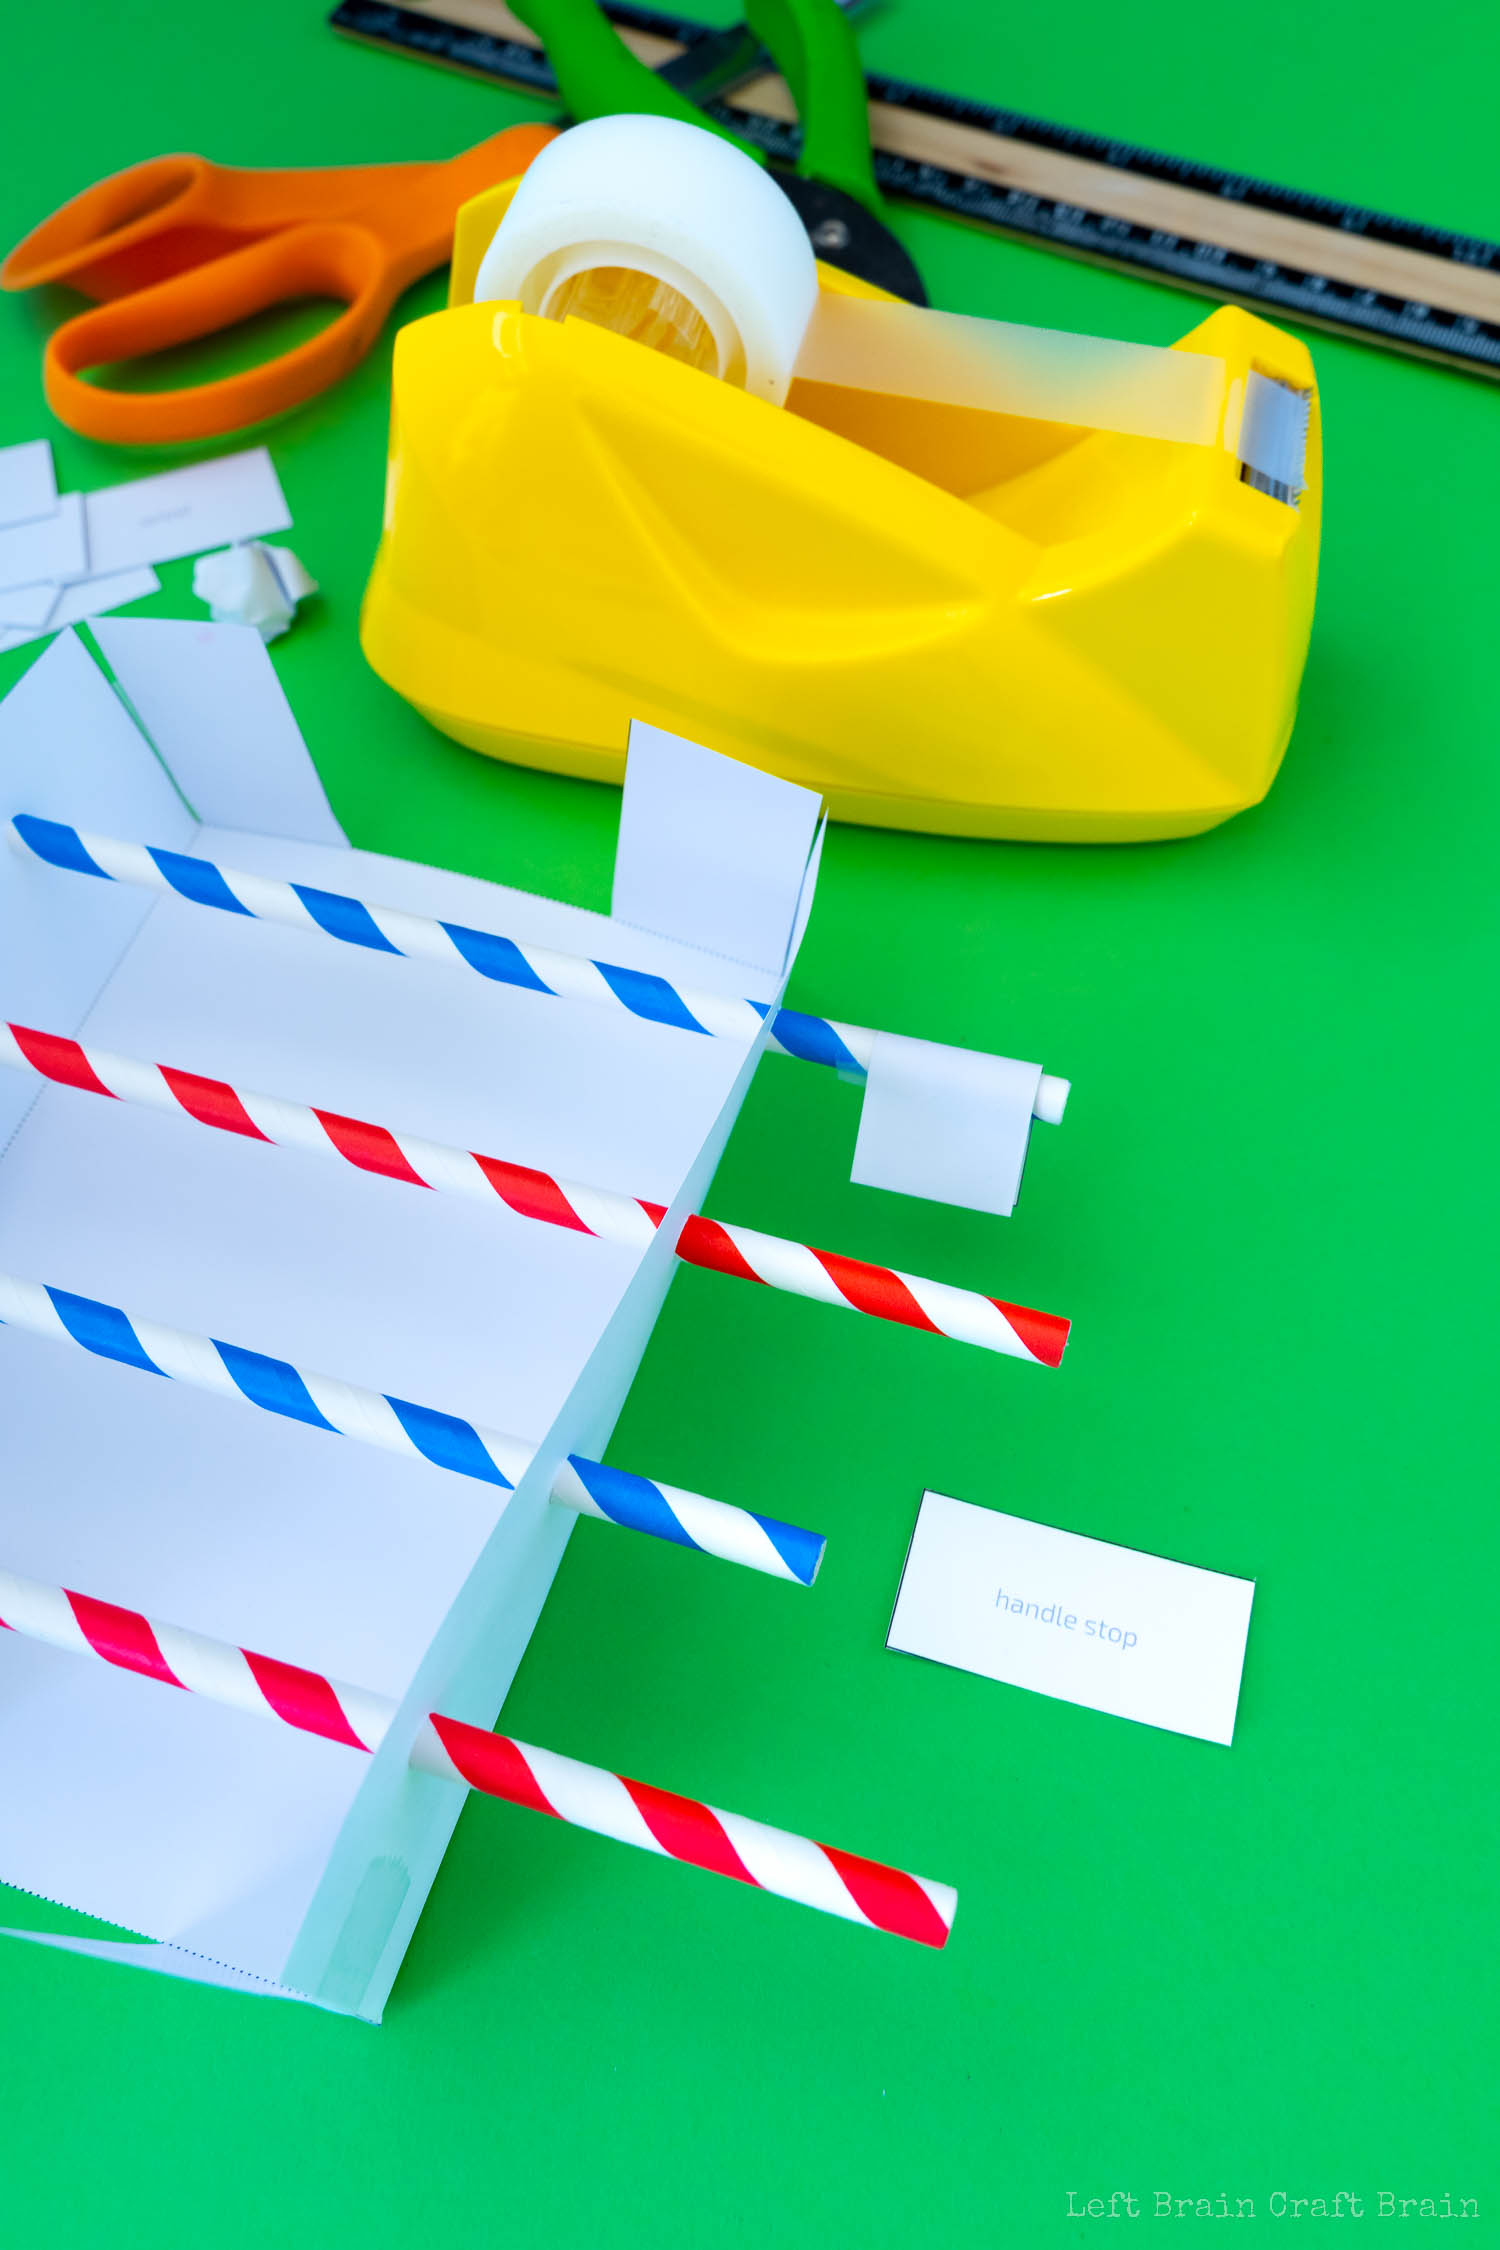 Fold handle stop paper on end of straw (green hole punch, red and blue striped paper straws, orange-handled scissors, yellow tape dispenser, black and wood ruler, white paper template, crumpled paper ball, small pieces of paper that say handle stop on green paper background)